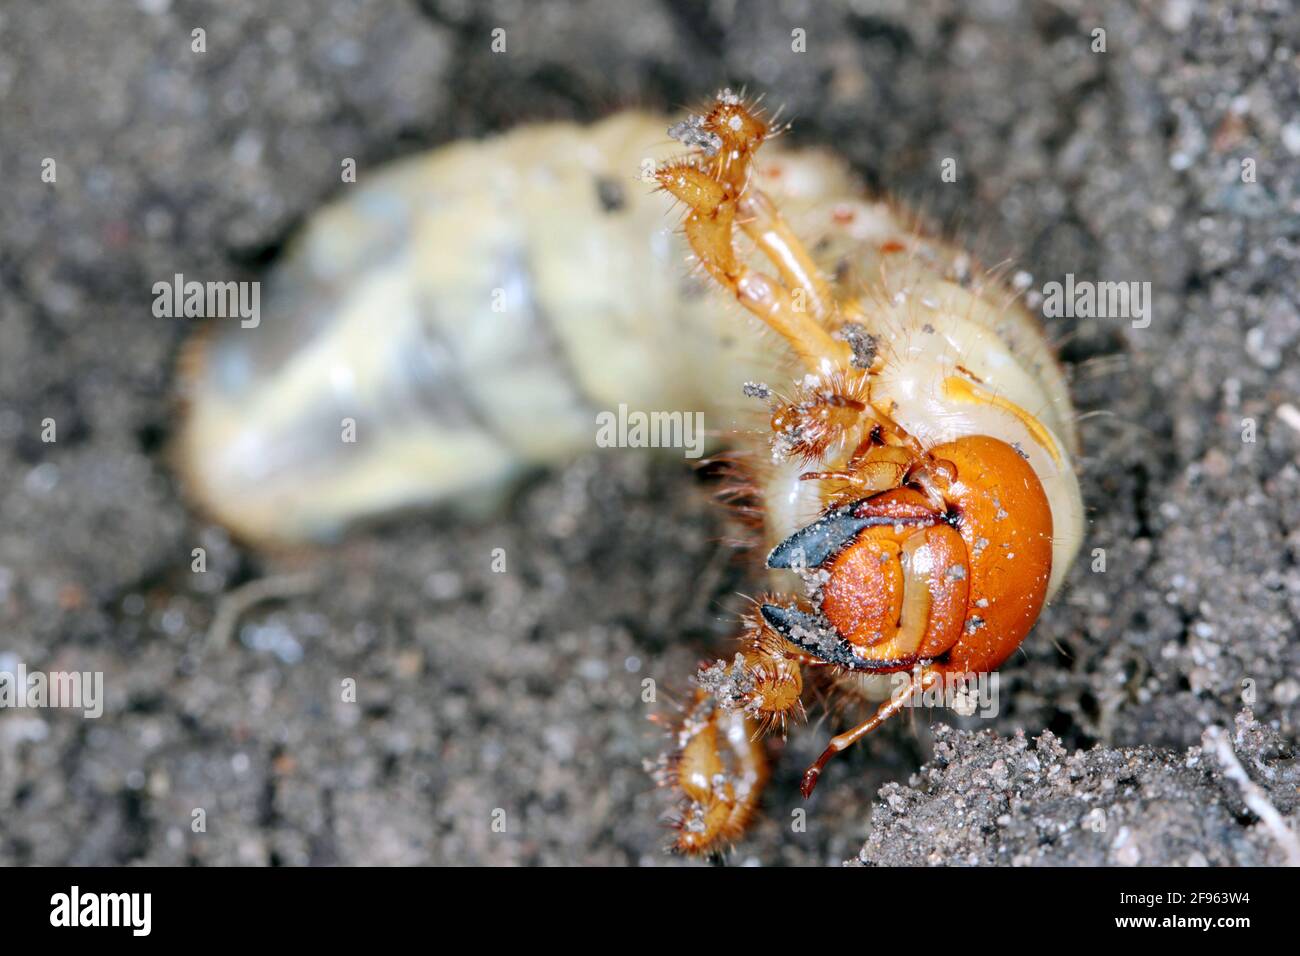 The larva of the May beetle Common Cockchafer or May Bug (Melolontha melolontha). Grubs are important pest of plants. Stock Photo